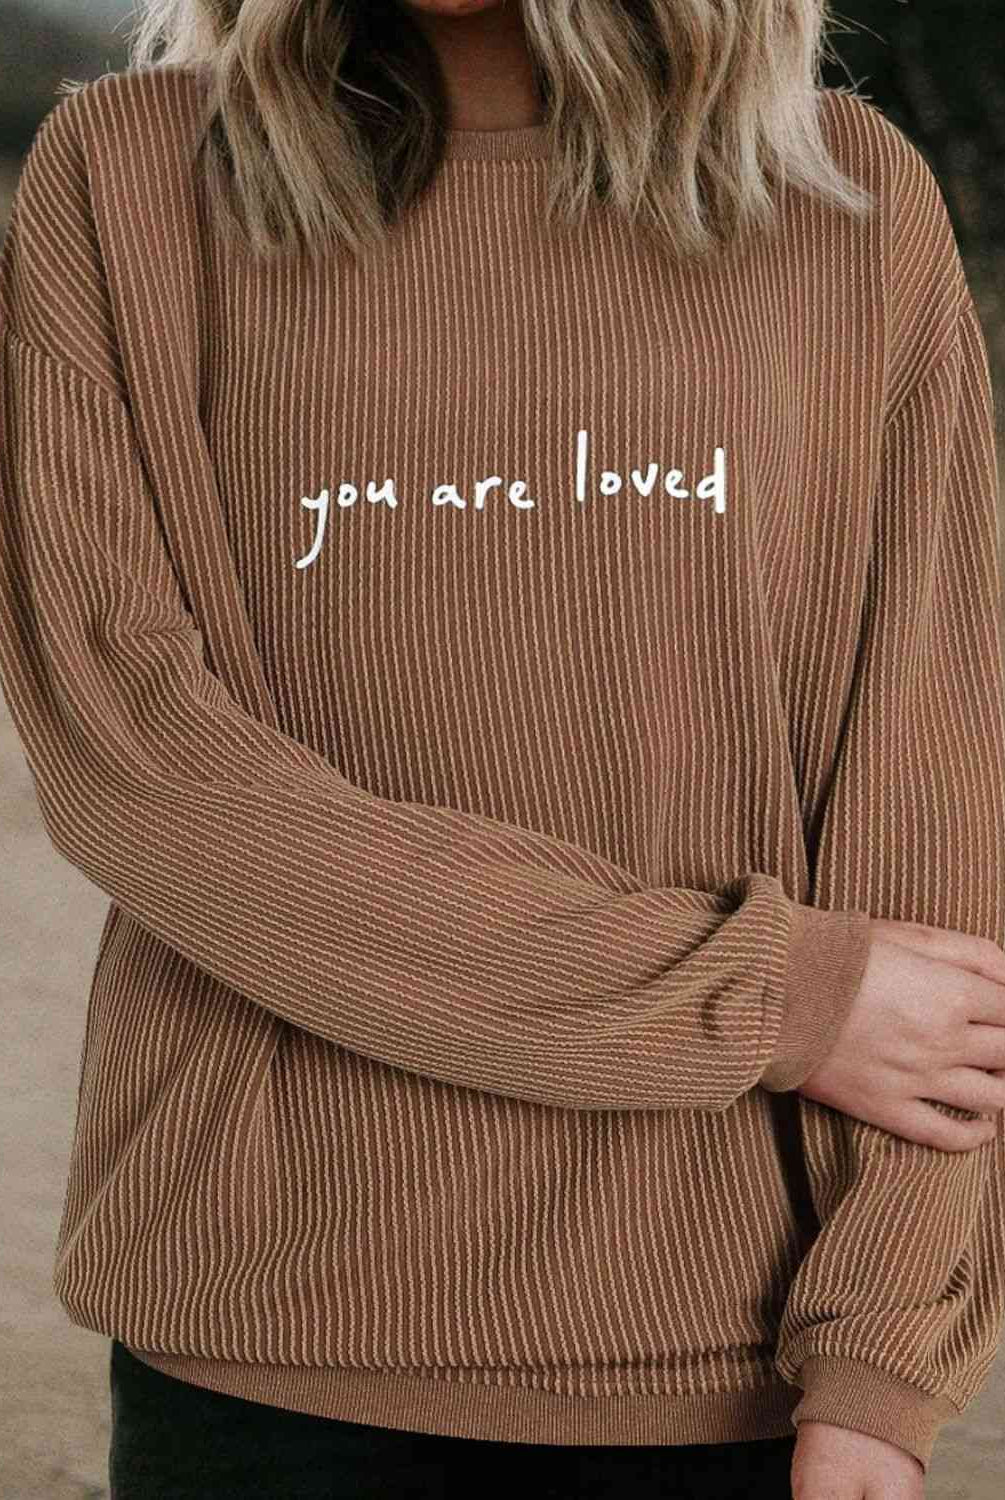 YOU ARE LOVED Graphic Dropped Shoulder Sweatshirt - GemThreads Boutique